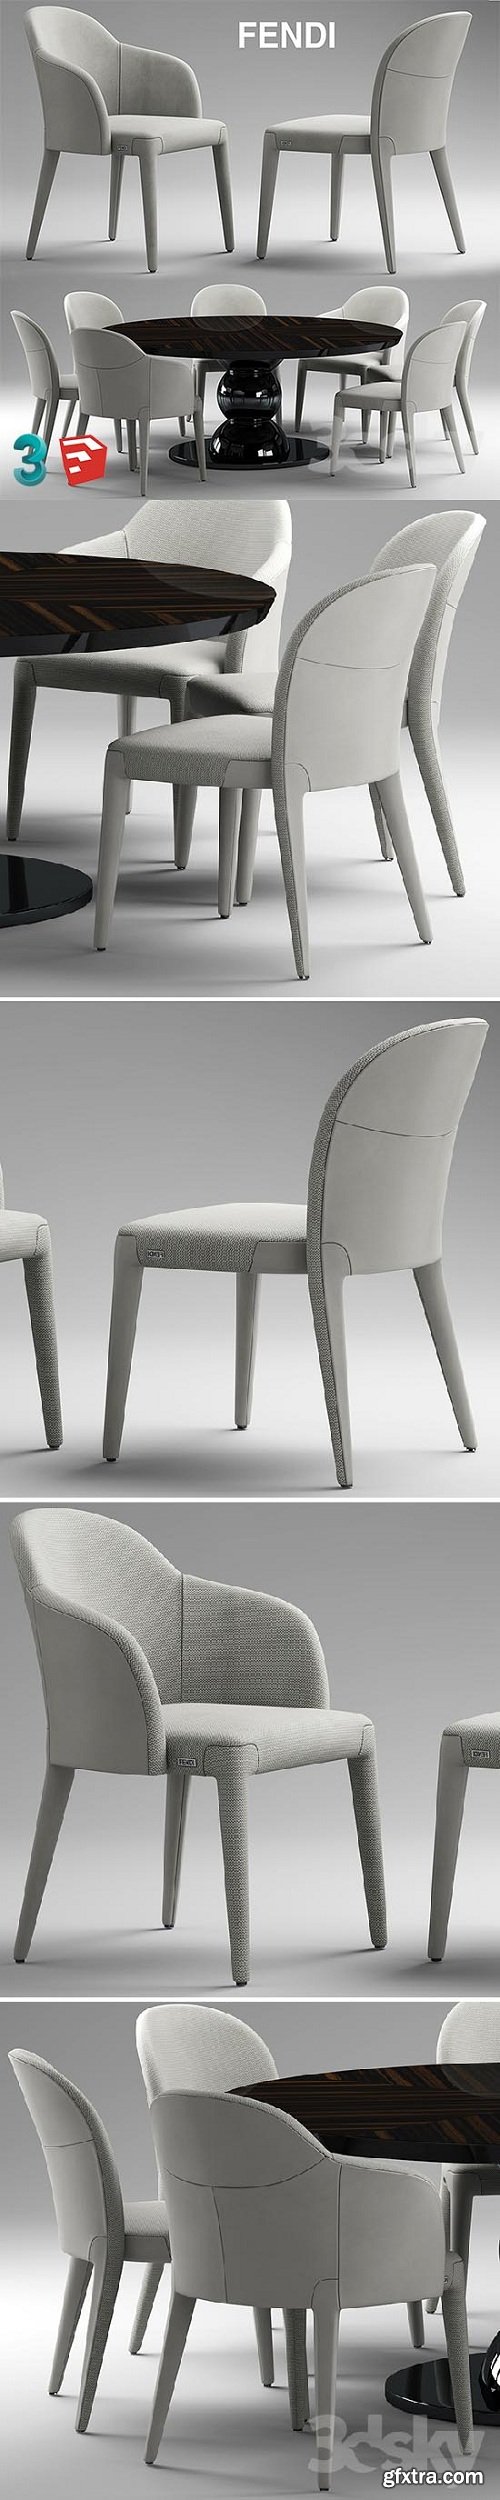 Table and chairs fendi Audrey Chair